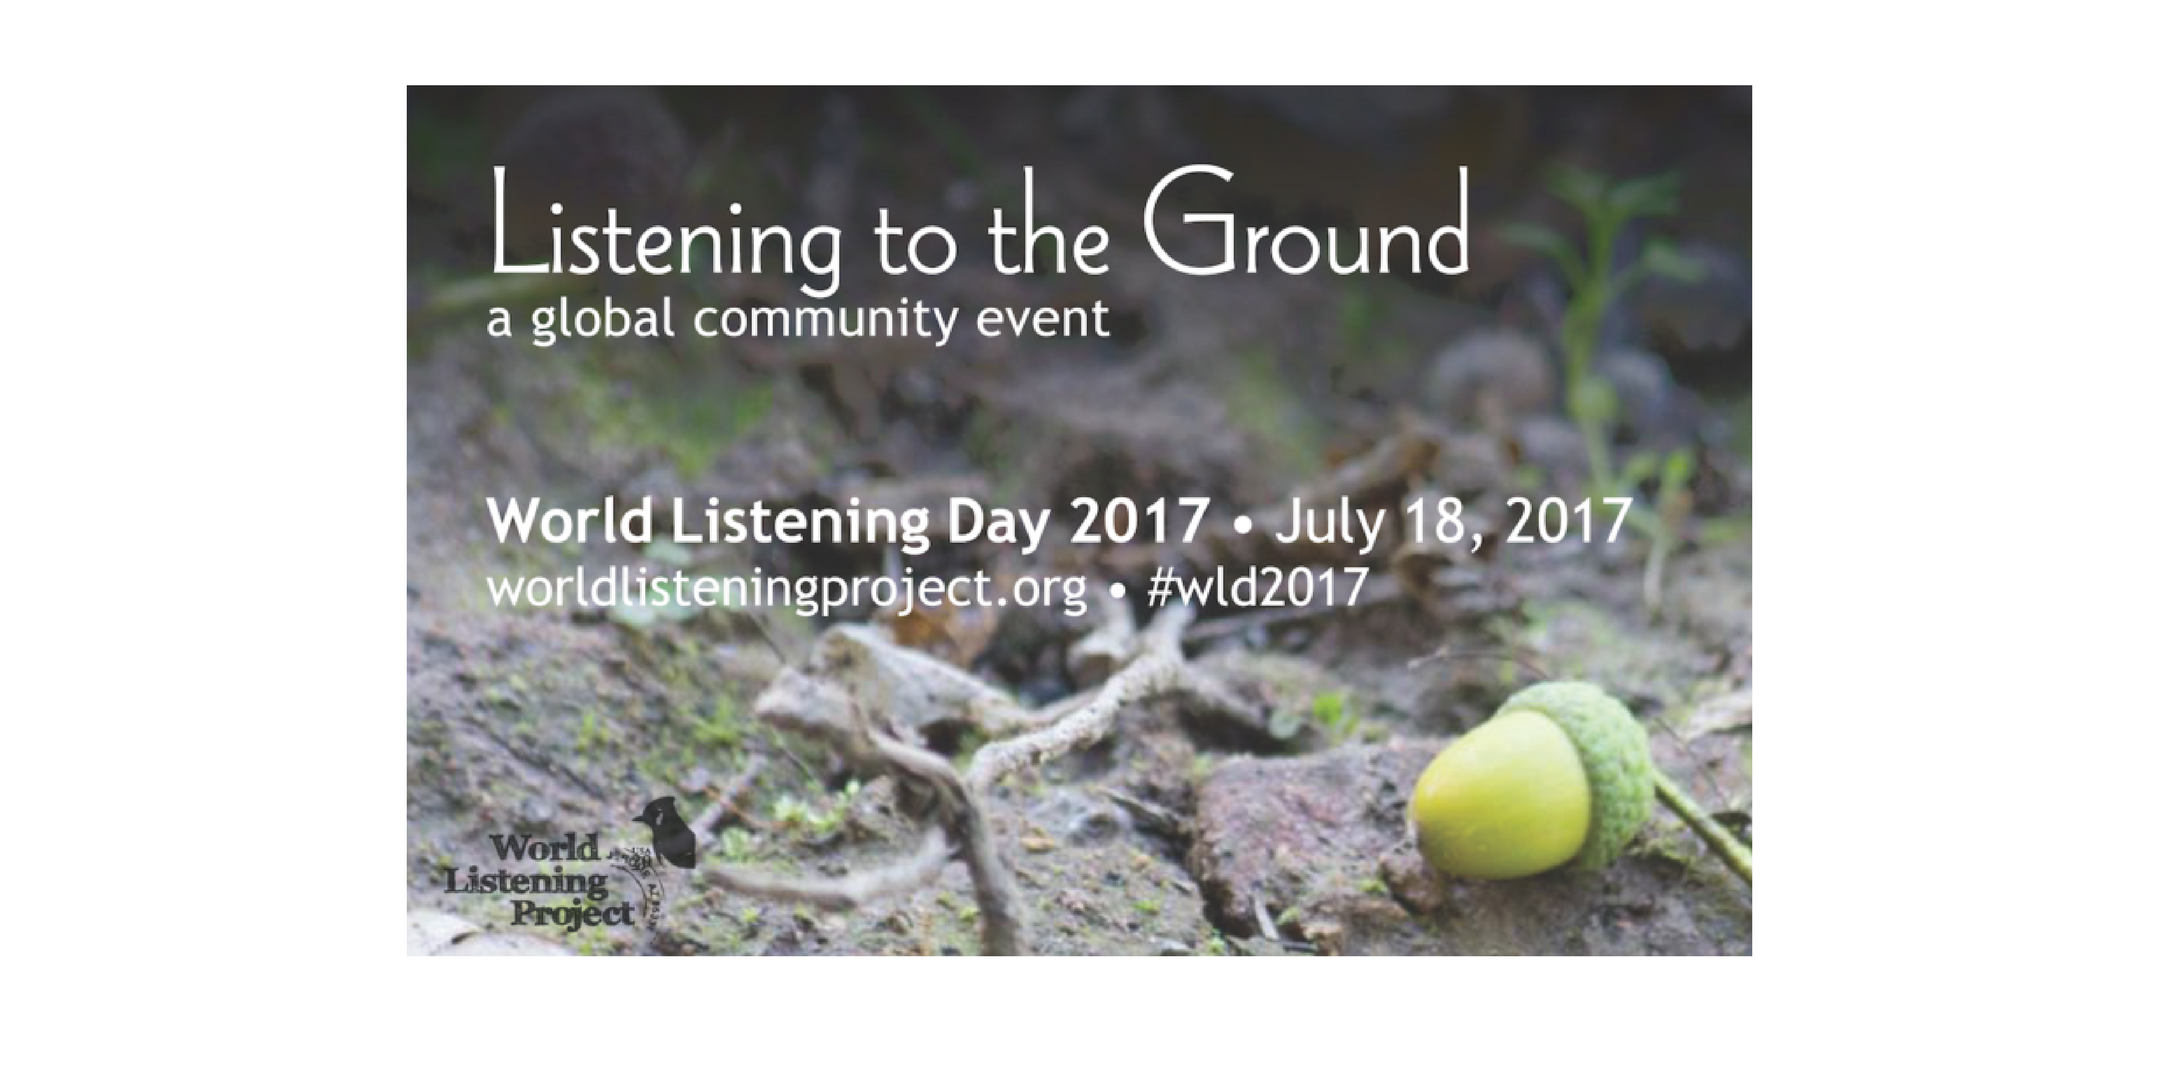 World Listening Day “Listening to the Ground” July 18, 2017